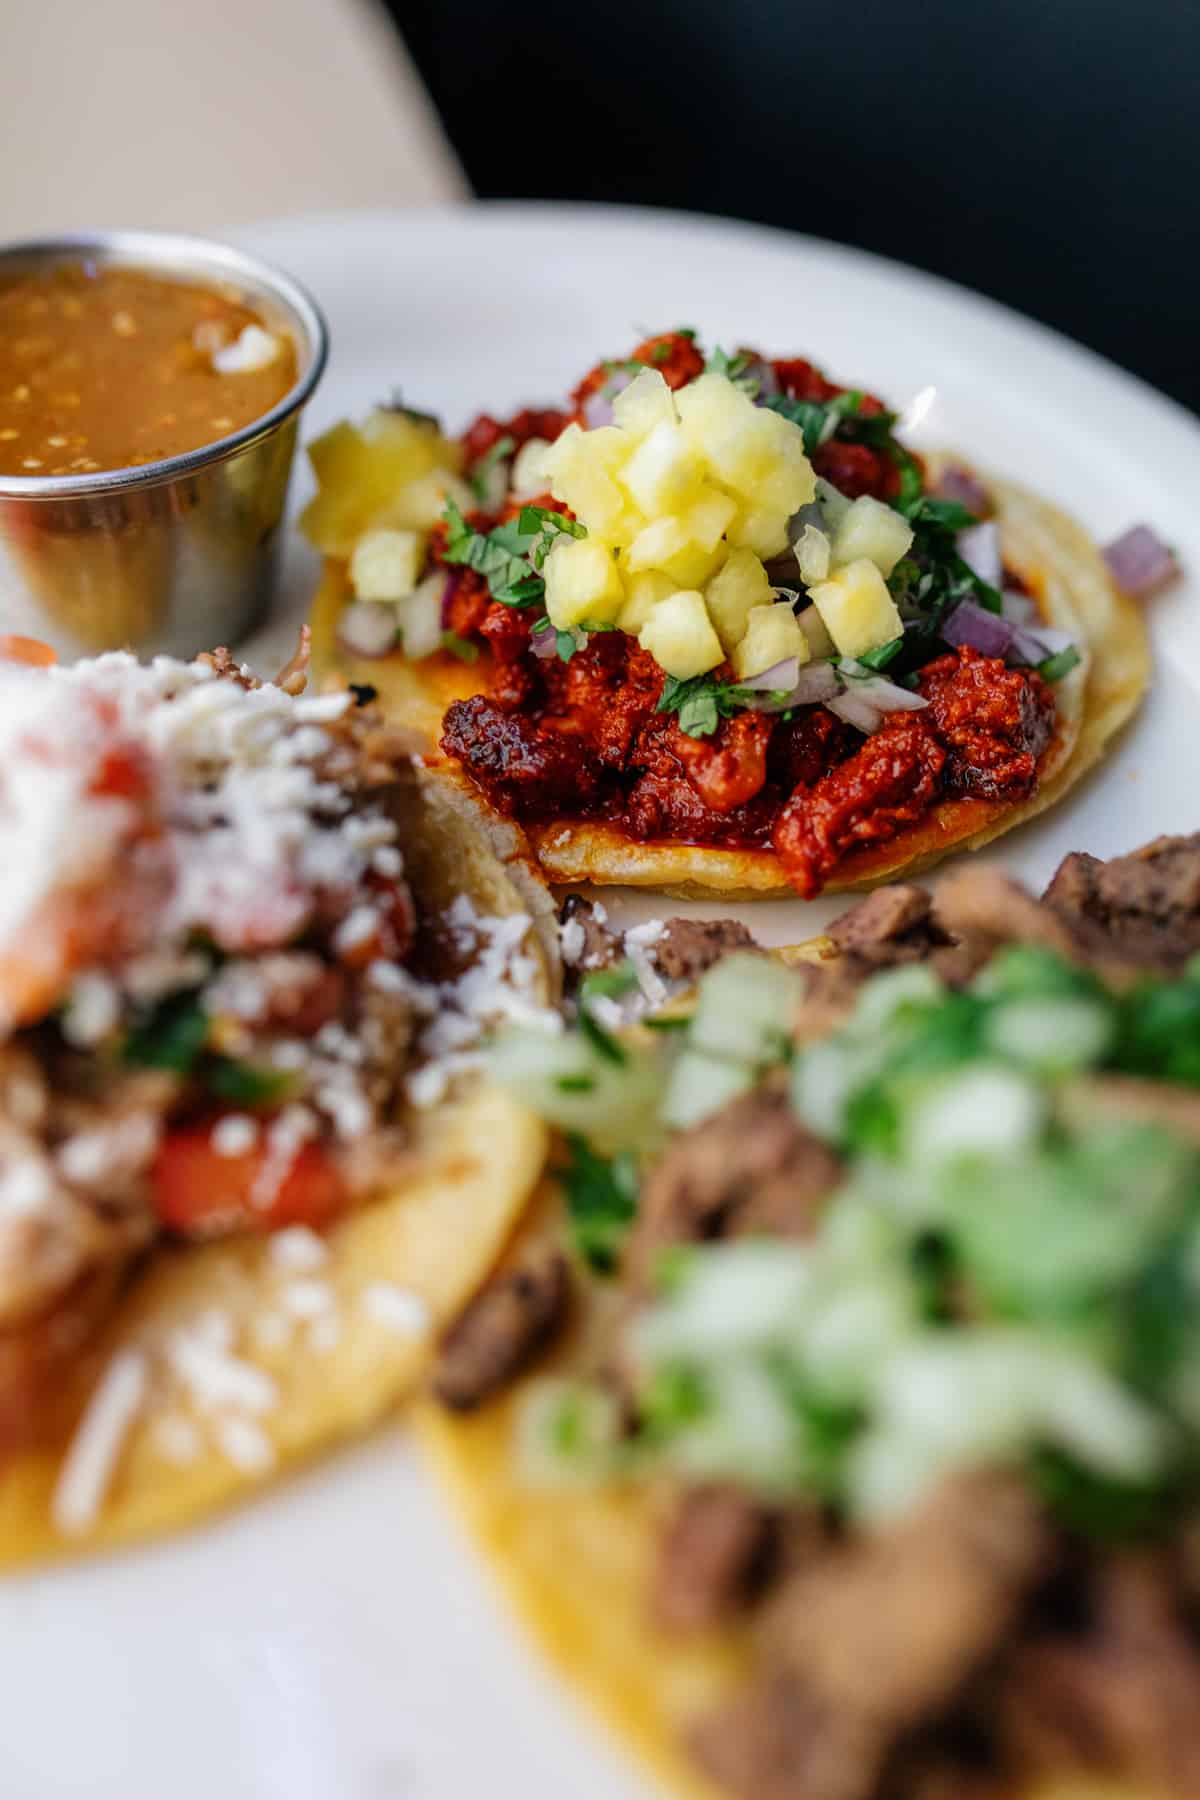 From hole-in-the-wall to upscale and inventive, we've rounded up the taco shops of your dreams in our guide to the 10 Best Tacos in Denver!